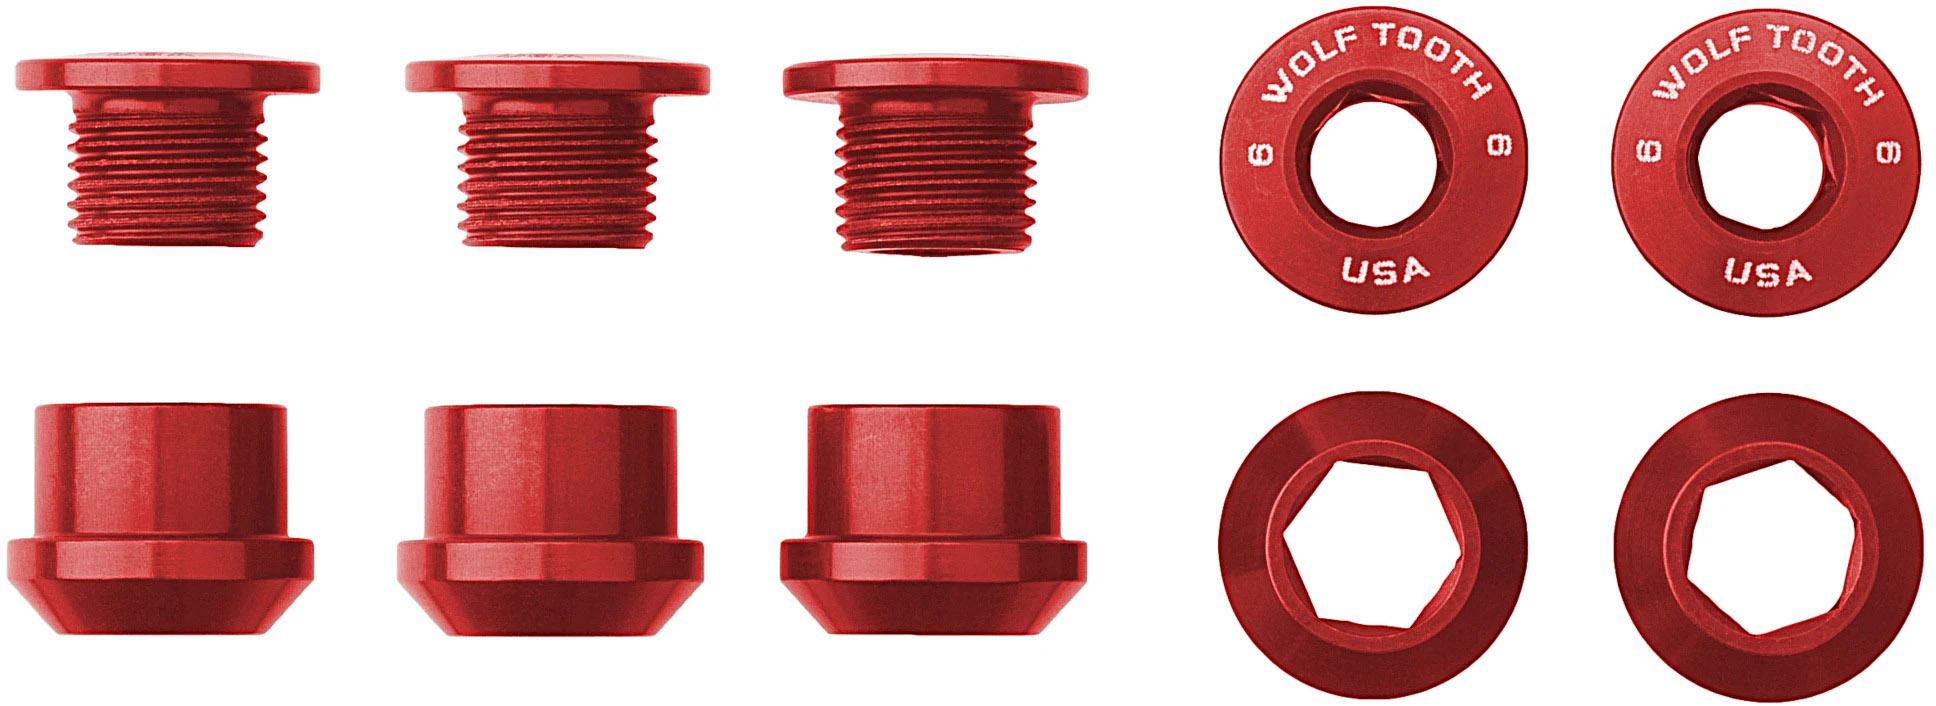 Wolf Tooth 1x Chainring Bolts And Nuts (pack Of 5)  Red